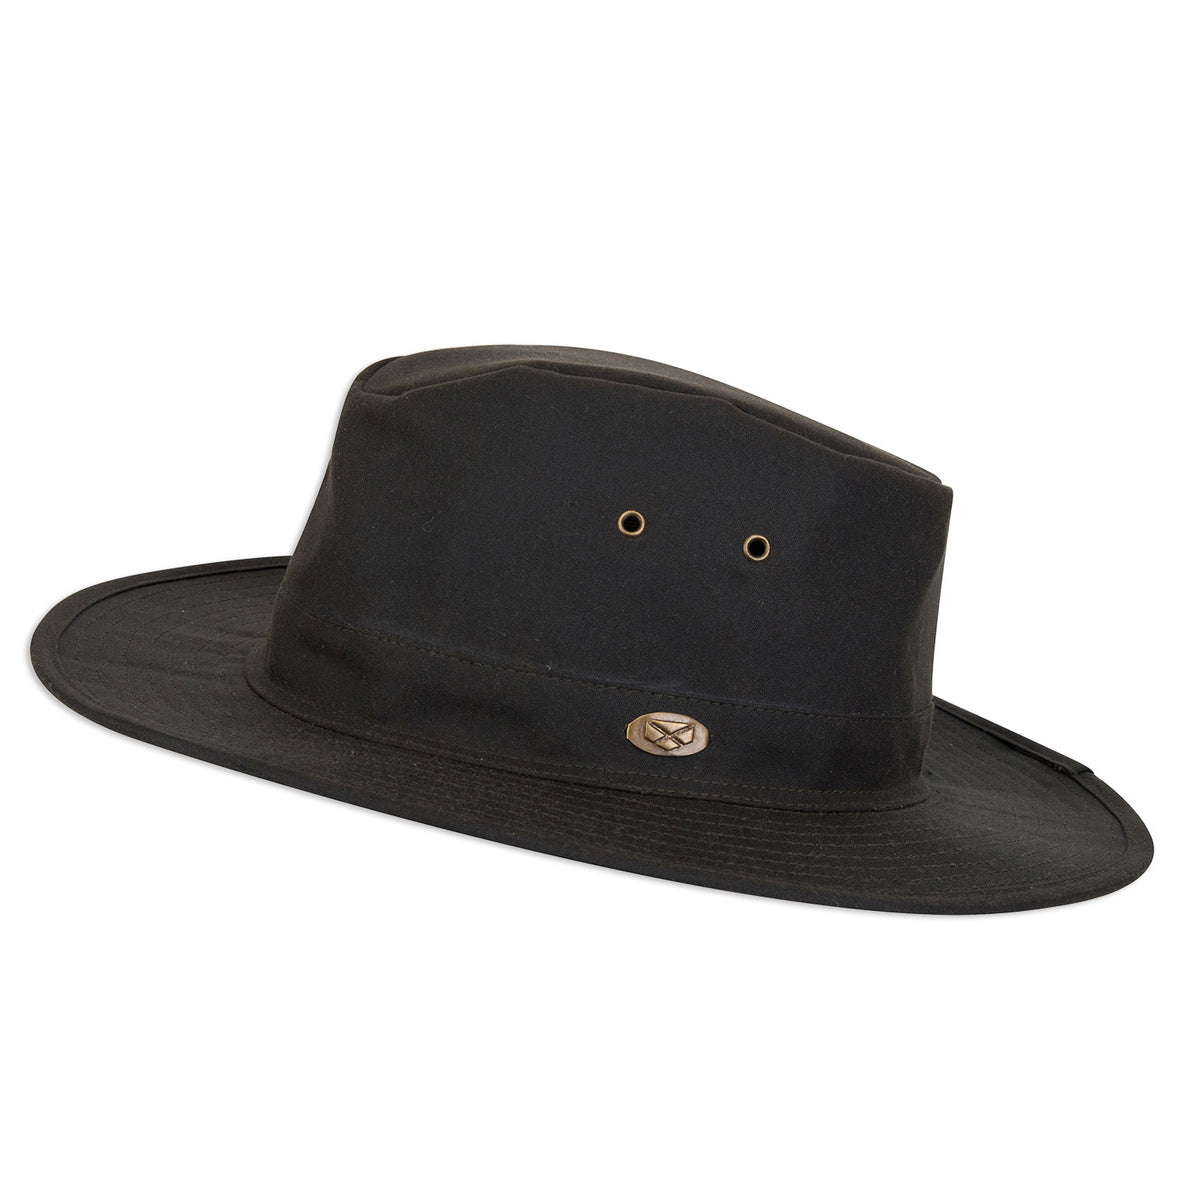 Country Waxed Fedora Brimmed hat